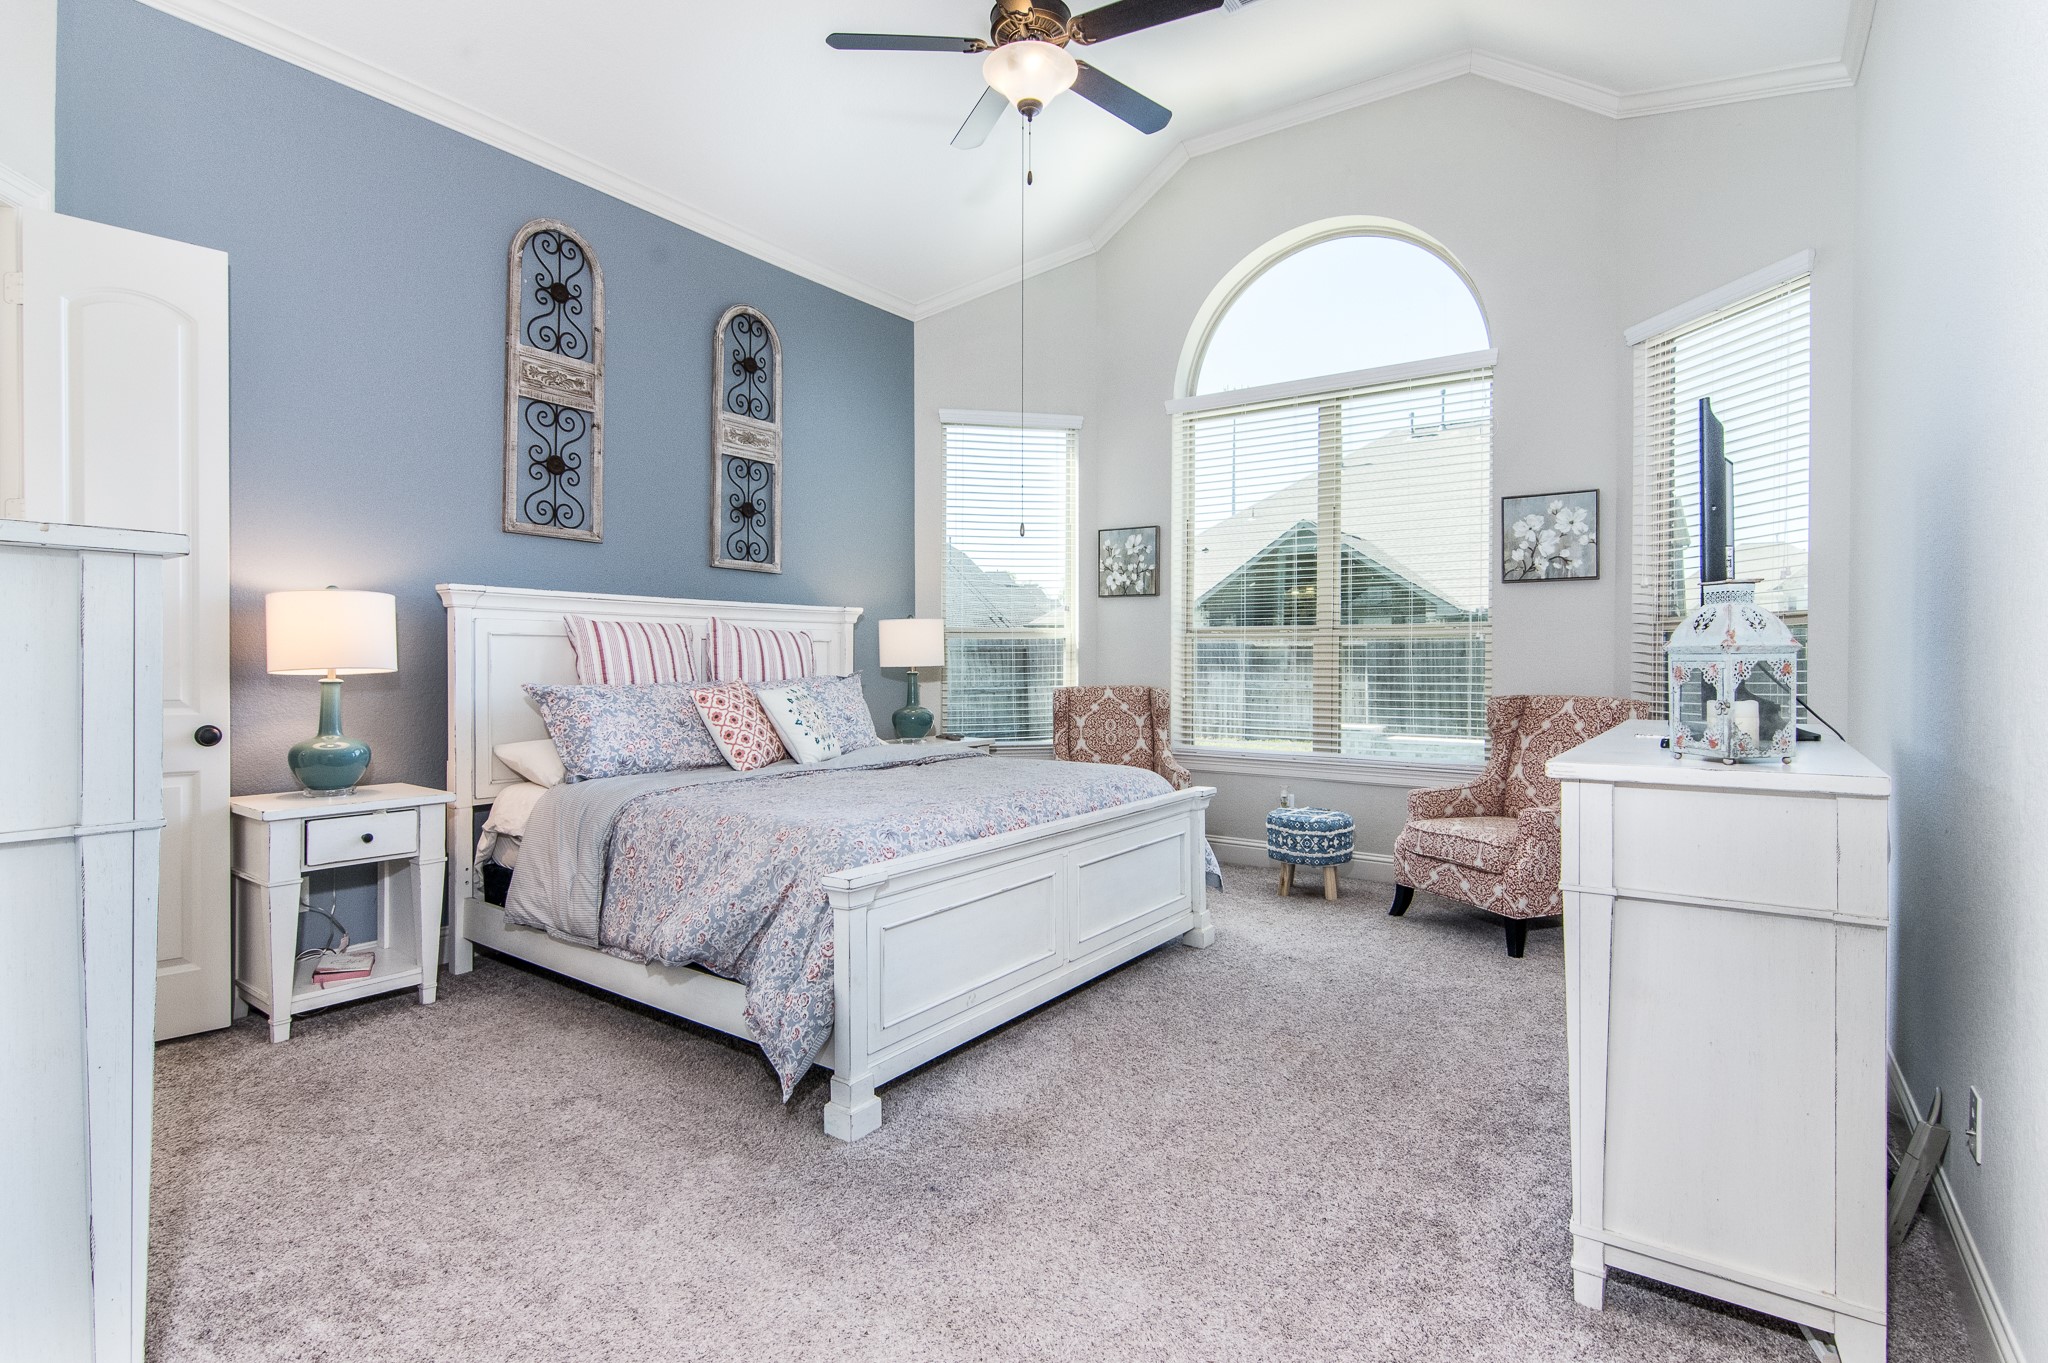 Master Bedroom with tall ceilings, Large windows, Natural light, large his and hers walk-in closets, and 9 foot french doors.